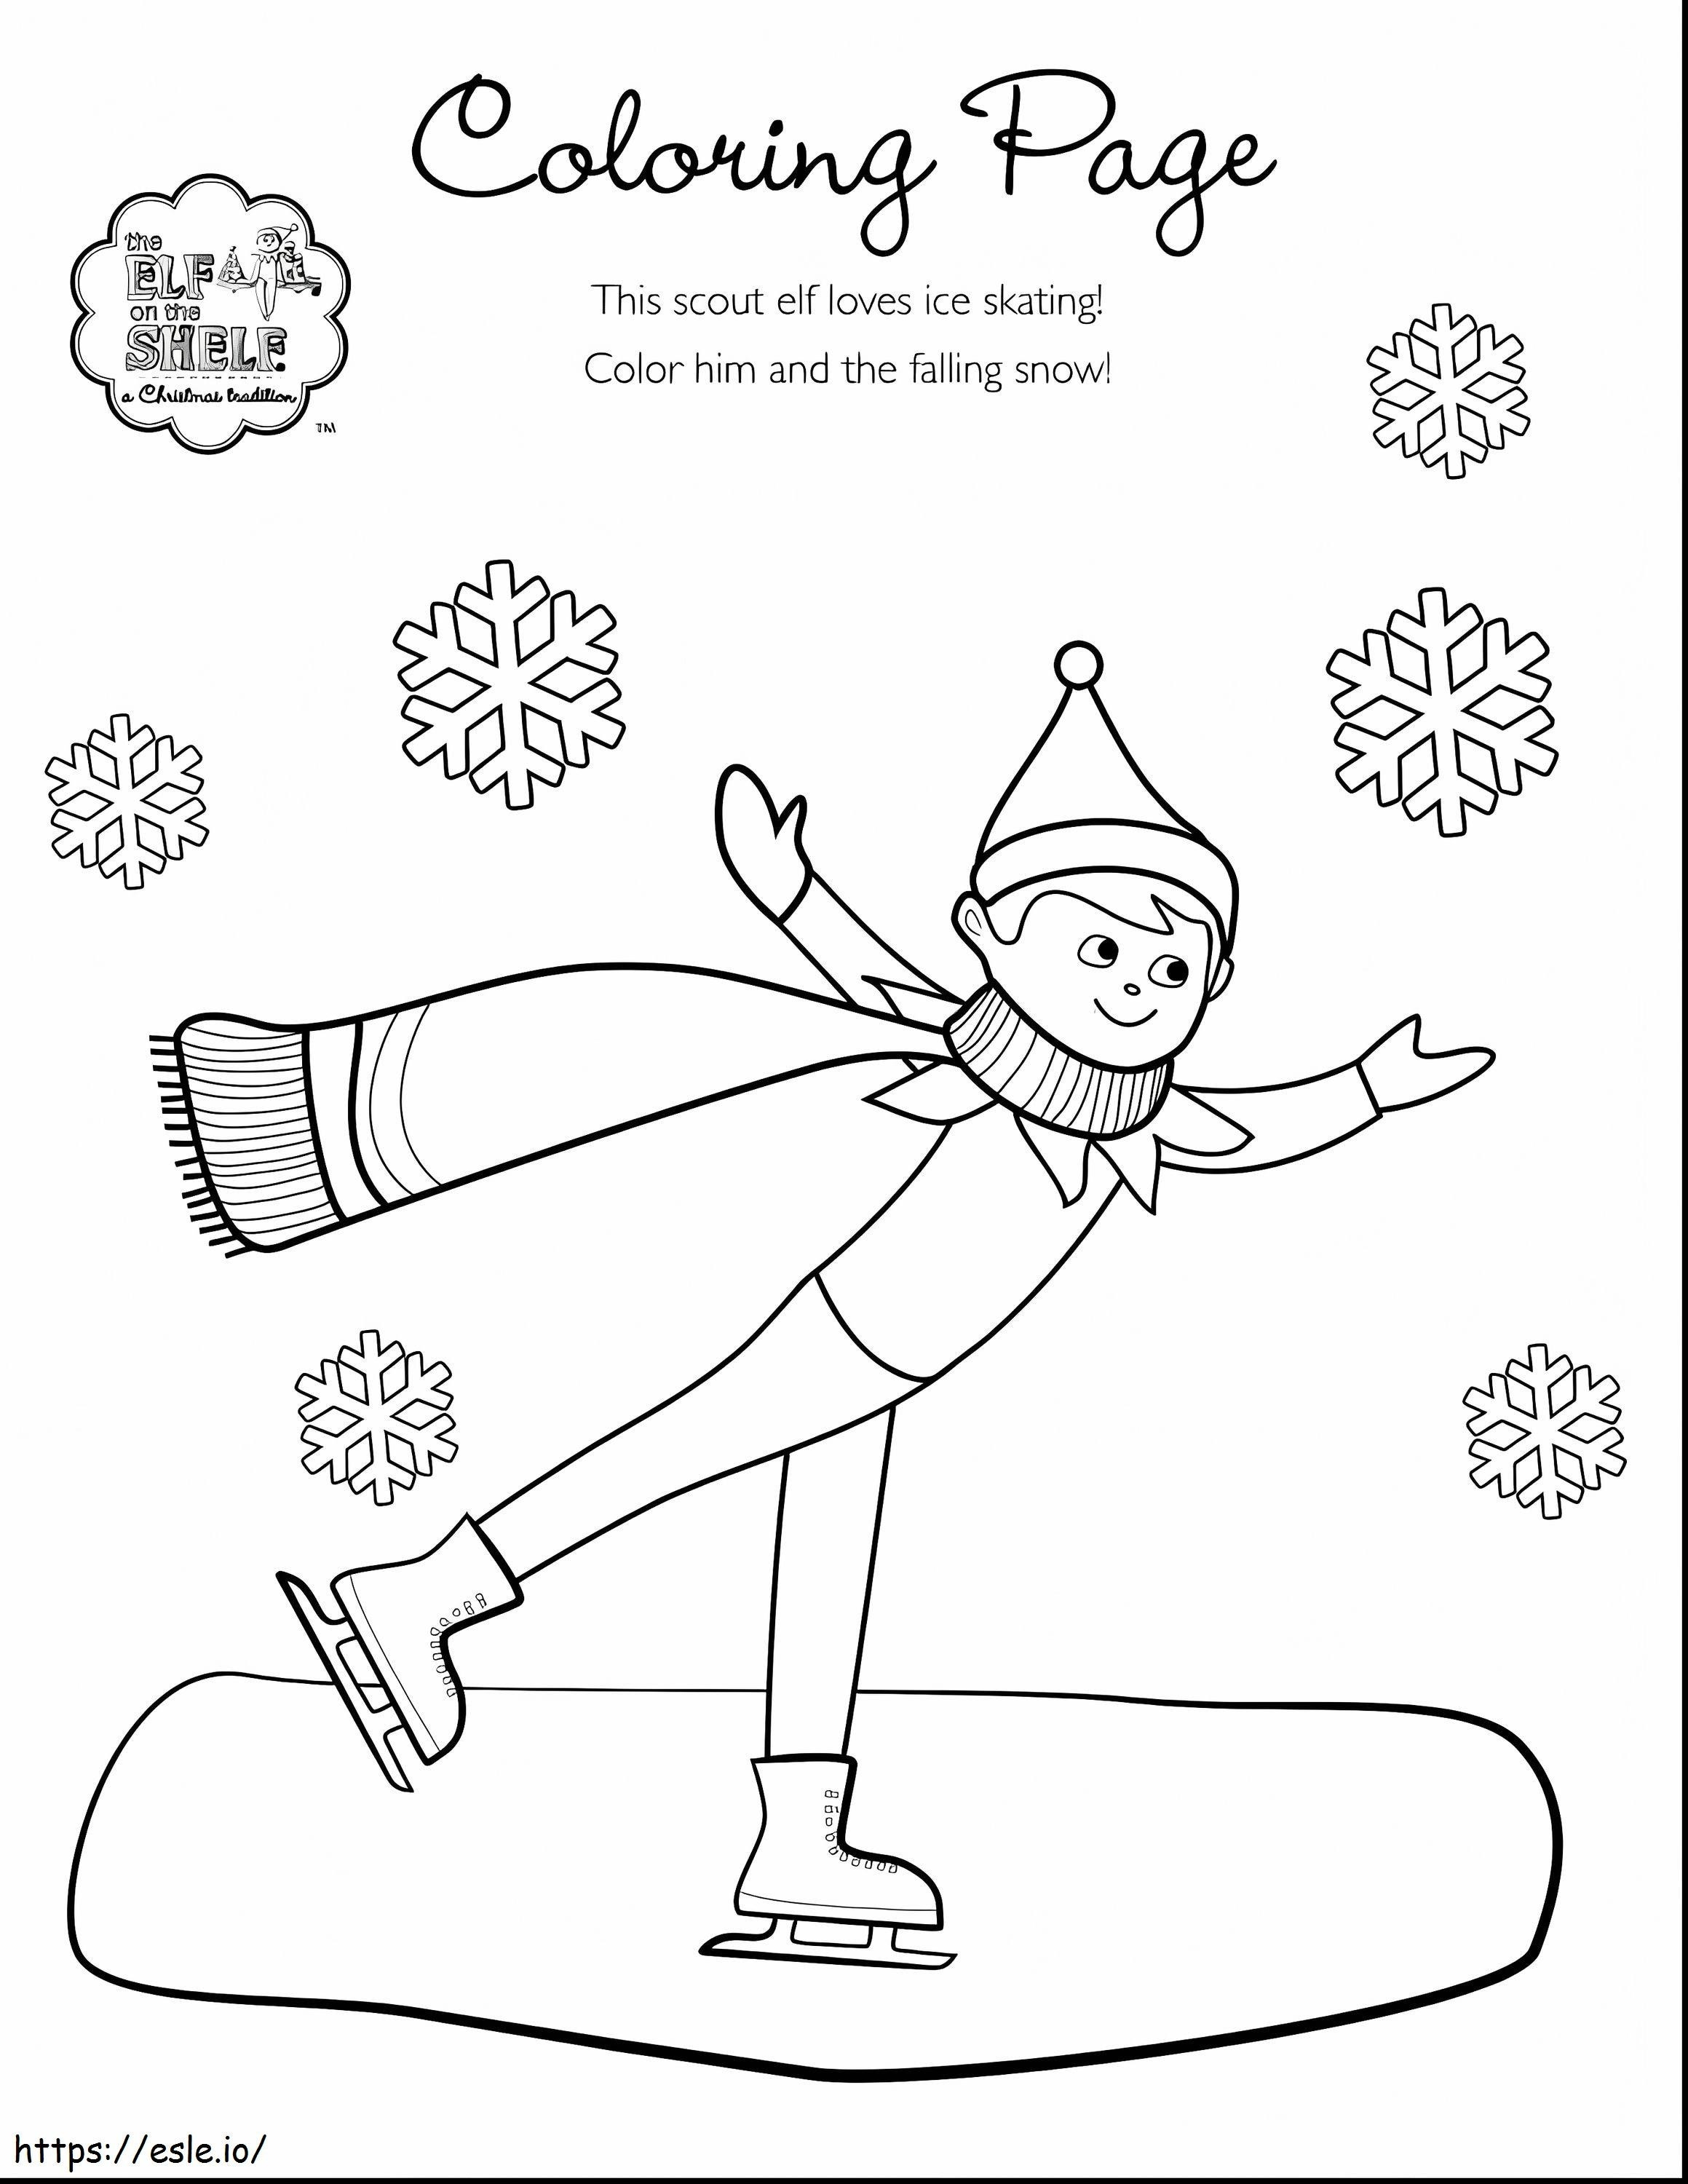 Ice Skating Elf On The Shelf coloring page